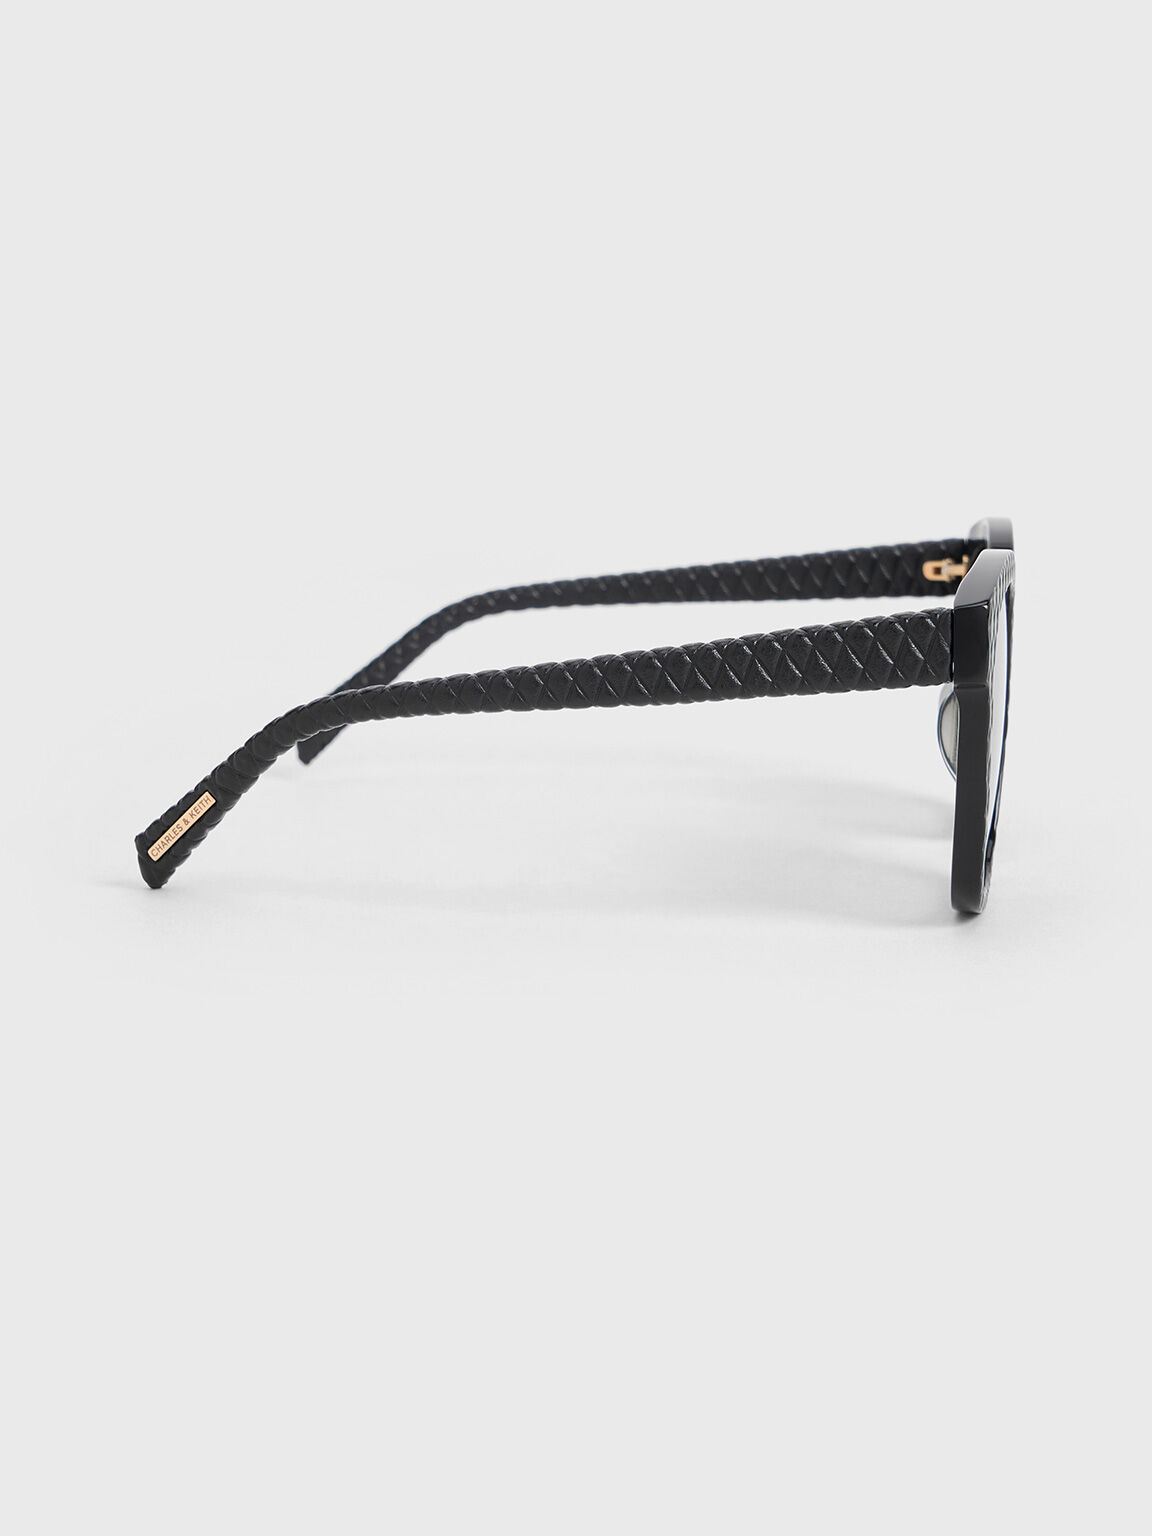 Recycled Acetate & Leather Quilted Sunglasses, Black, hi-res